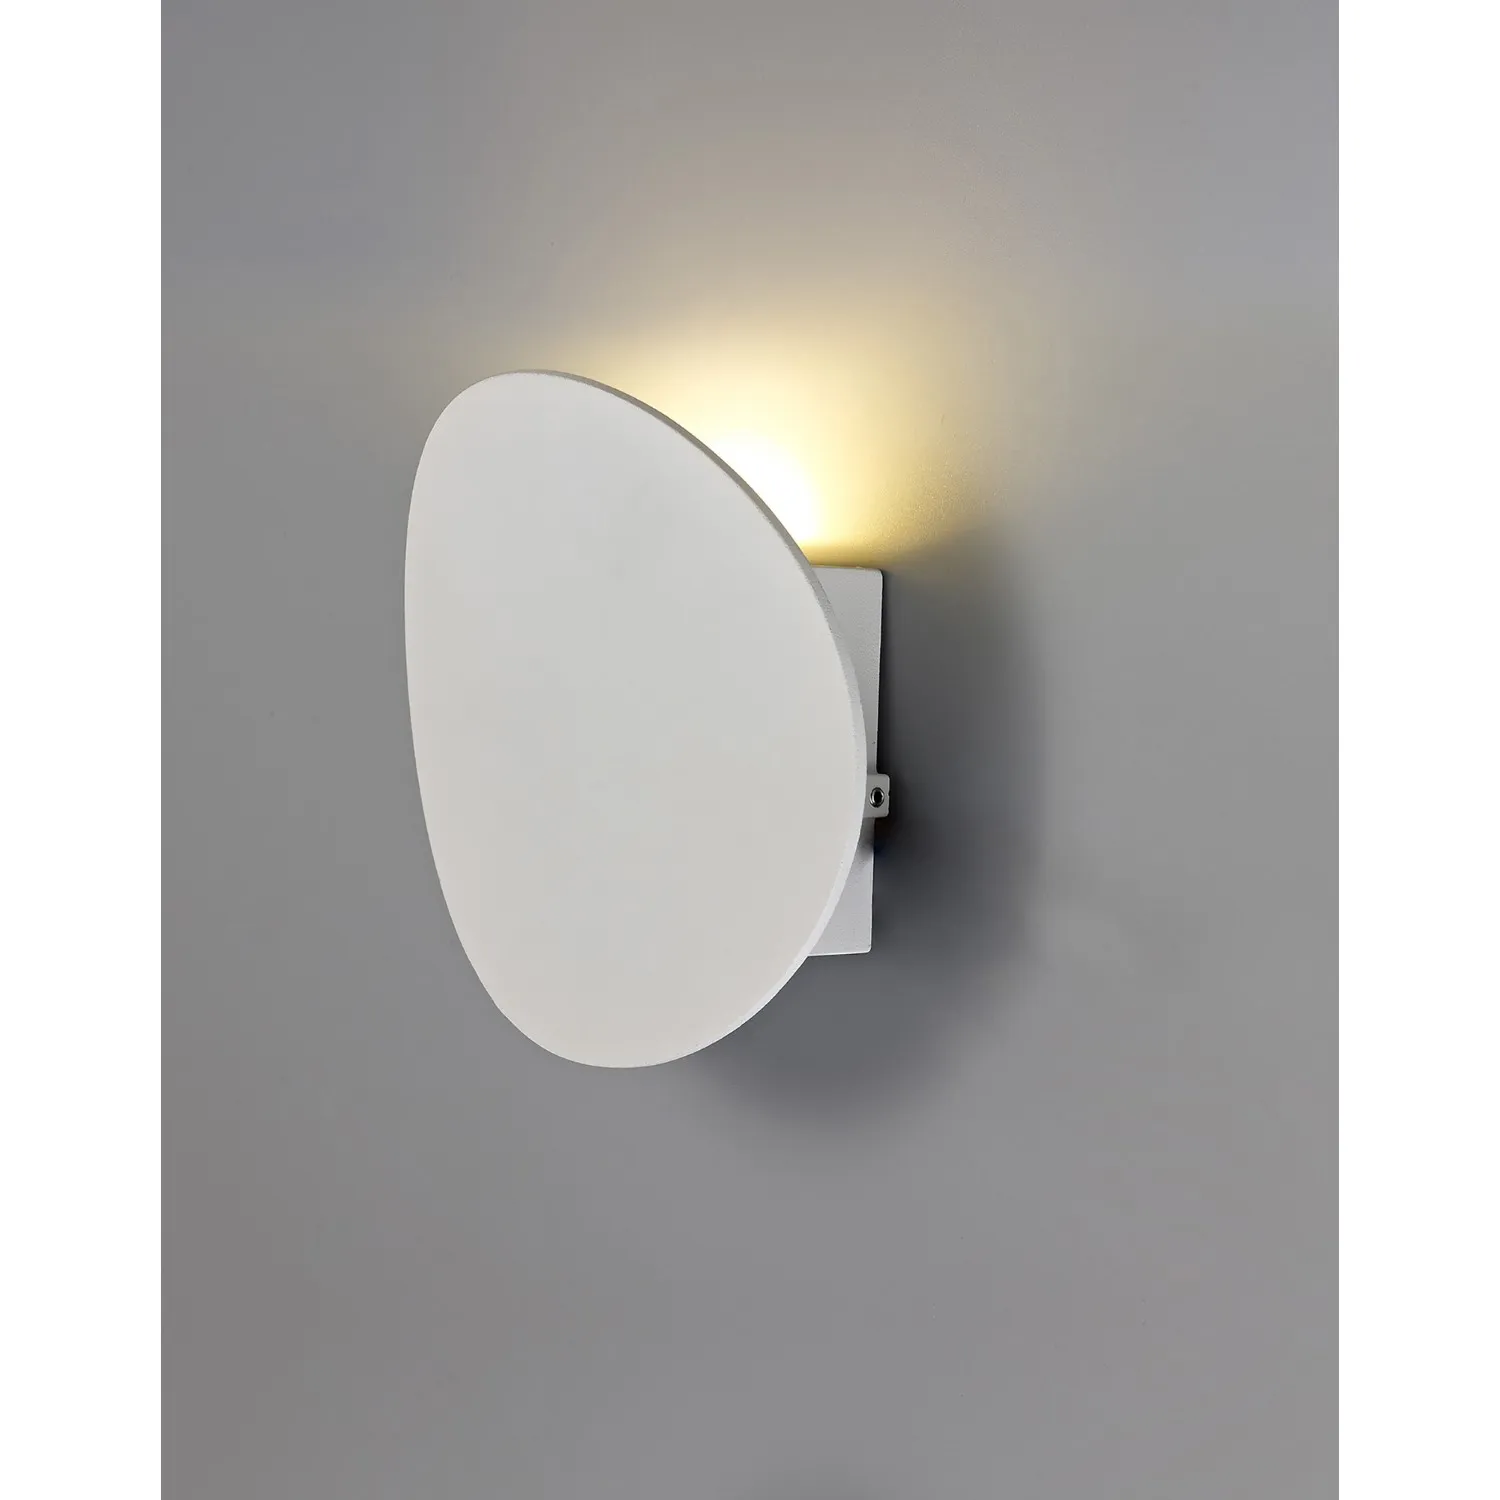 Limehouse Wall Lamp, 1 x 6W LED, 3000K, 700lm, IP54, Sand White, 3yrs Warranty